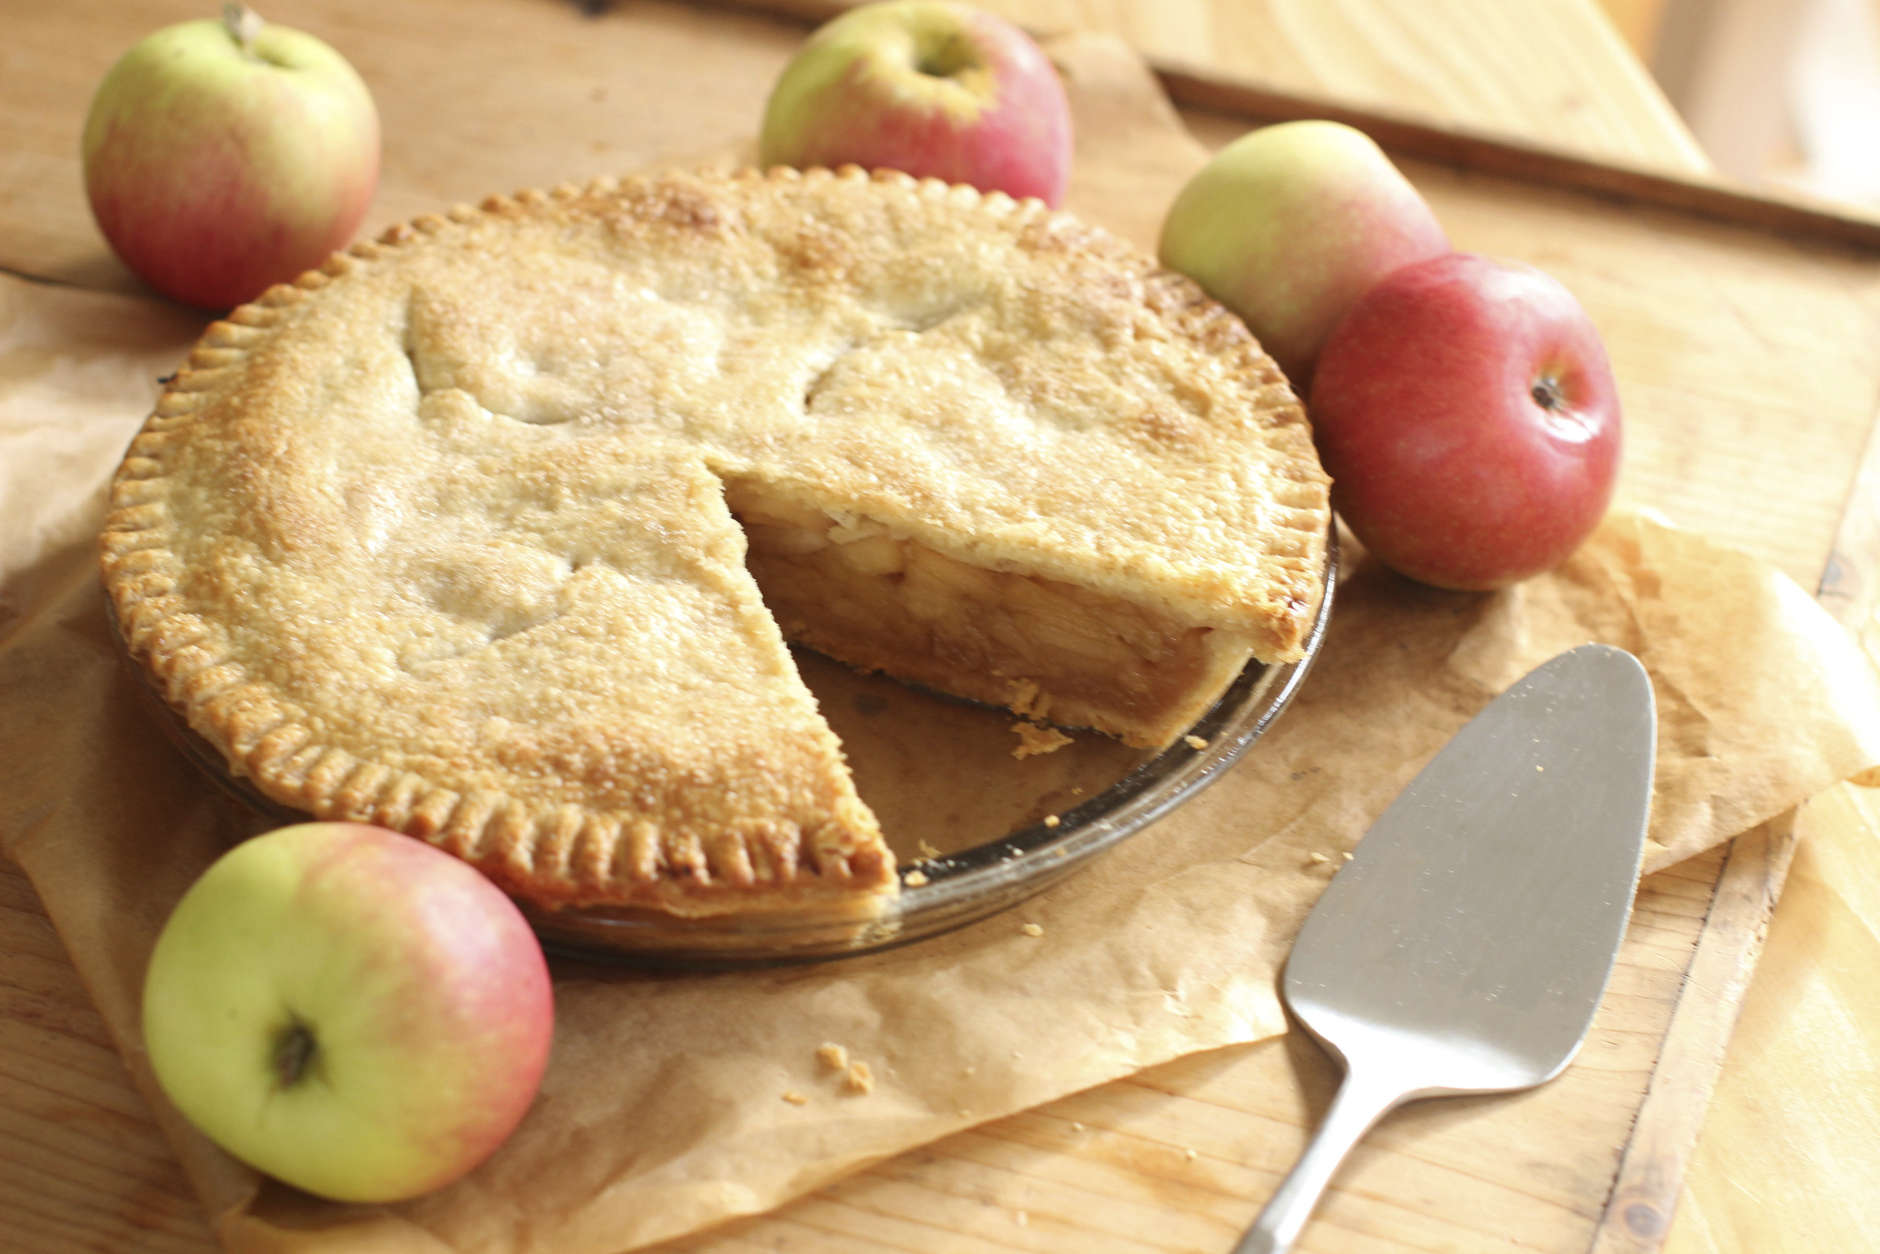 This Sept. 21, 2015 photo shows deep dish apple pie in Concord, NH. Apple pie ingredients are few and elemental: apples, of course, along with sugar, flavoring and pie crust. But choosing the right apples is a serious business. (AP Photo/Matthew Mead)